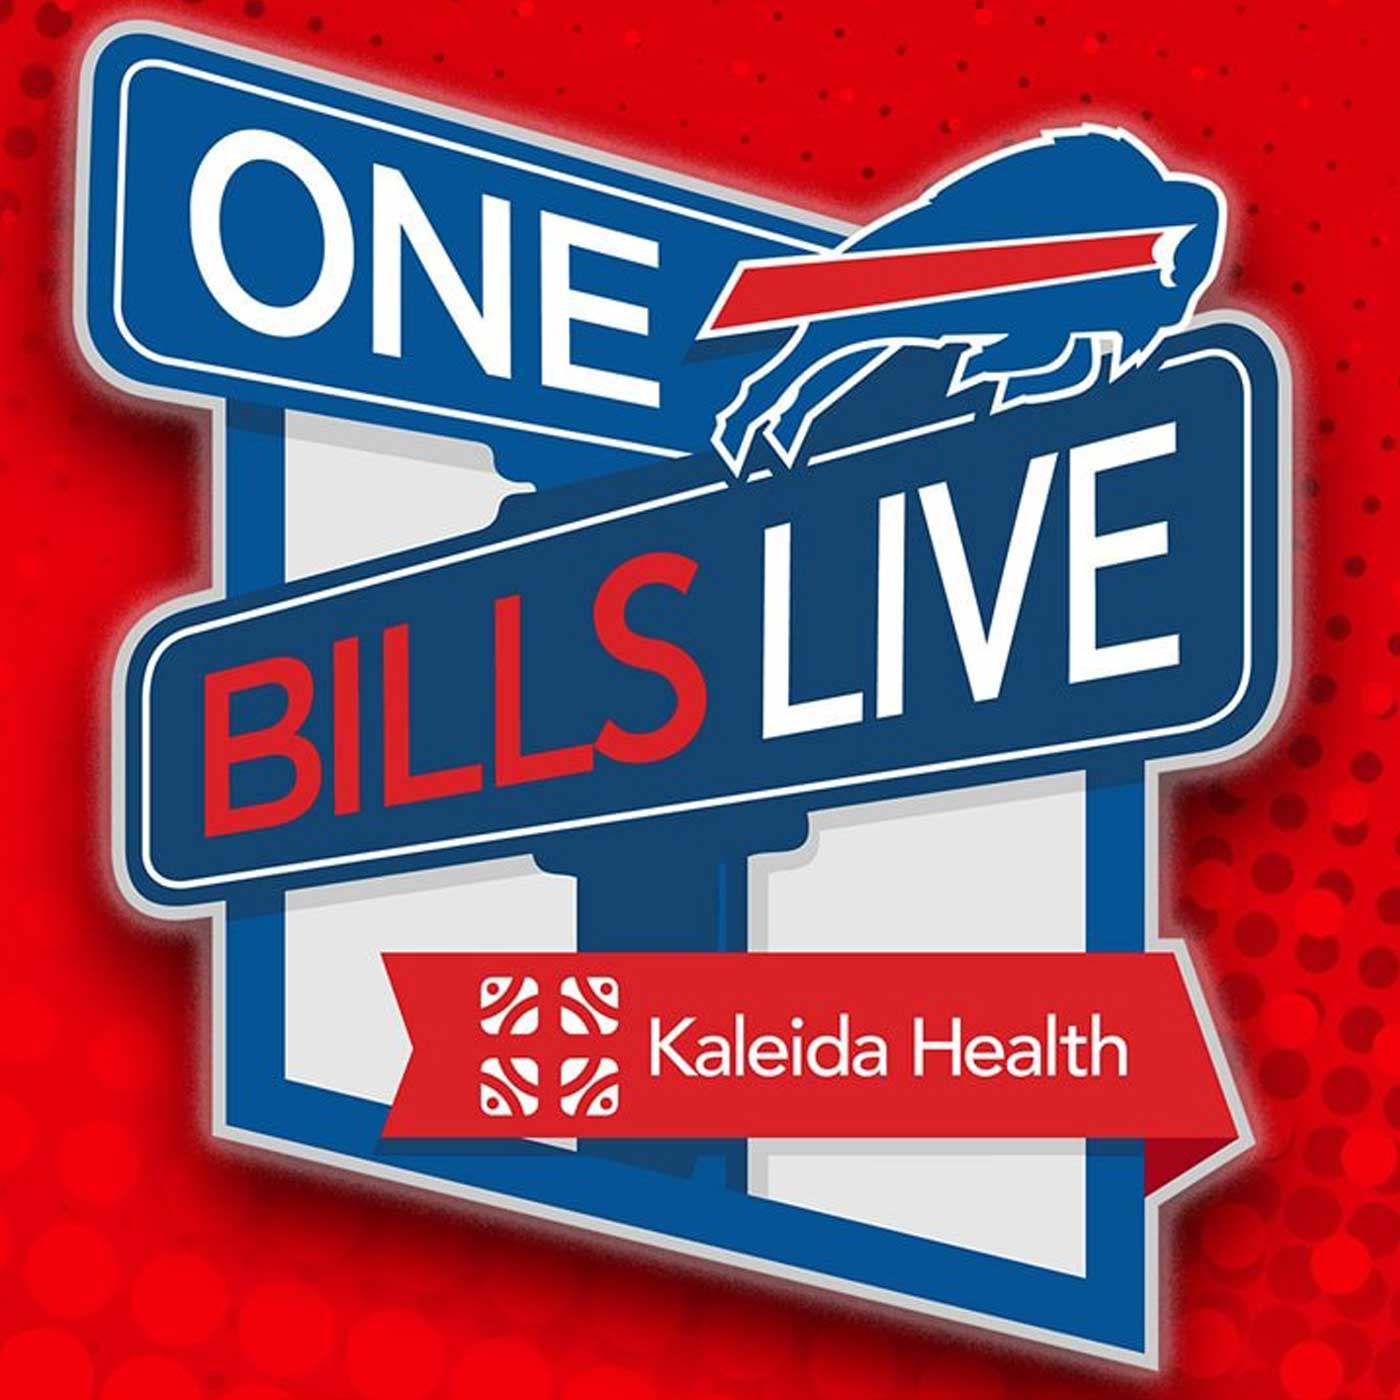 “I’m All About Winning Football Games” | Jake Fromm Joins One Bills Live